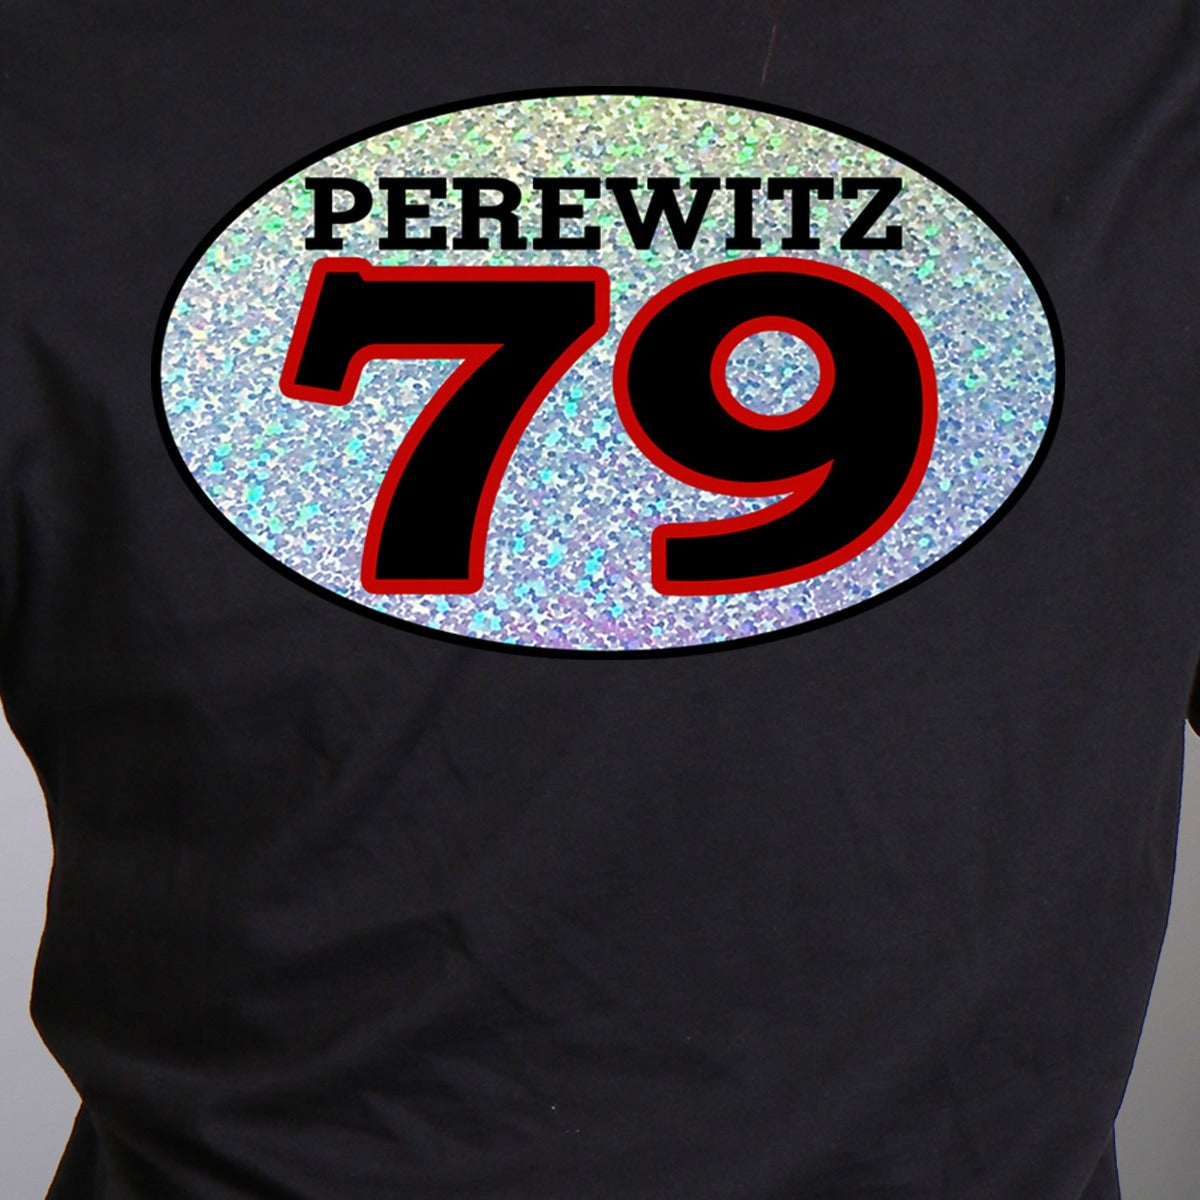 Hot Leathers Women's Official Perewitz Racing Oval 79 T-Shirt